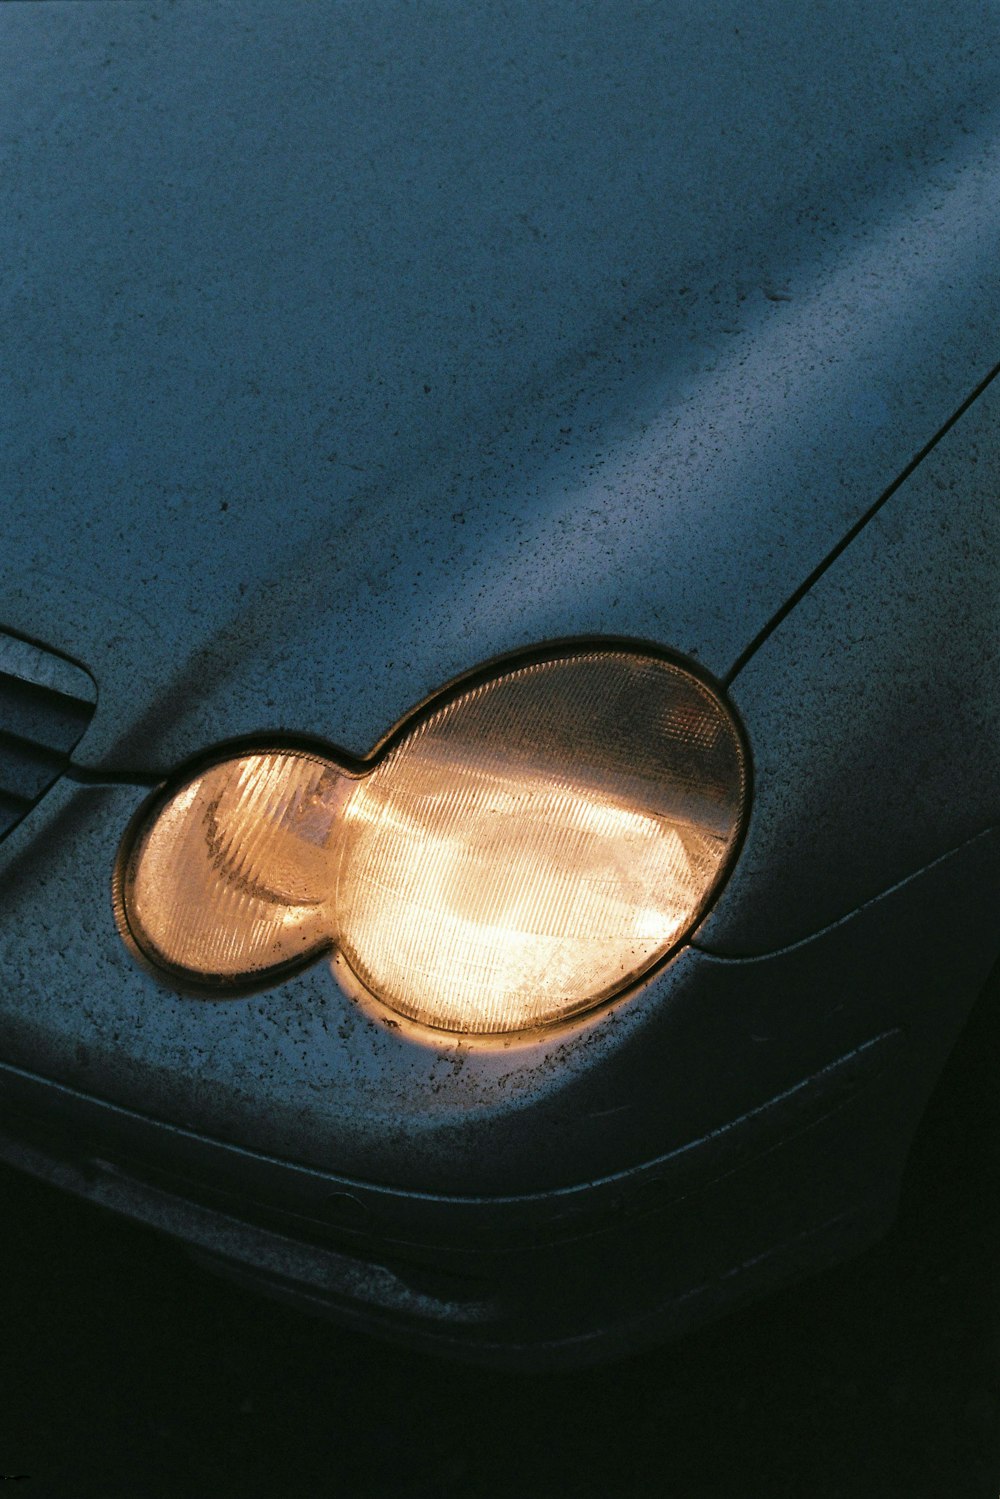 close-up photography of vehicle's headlight